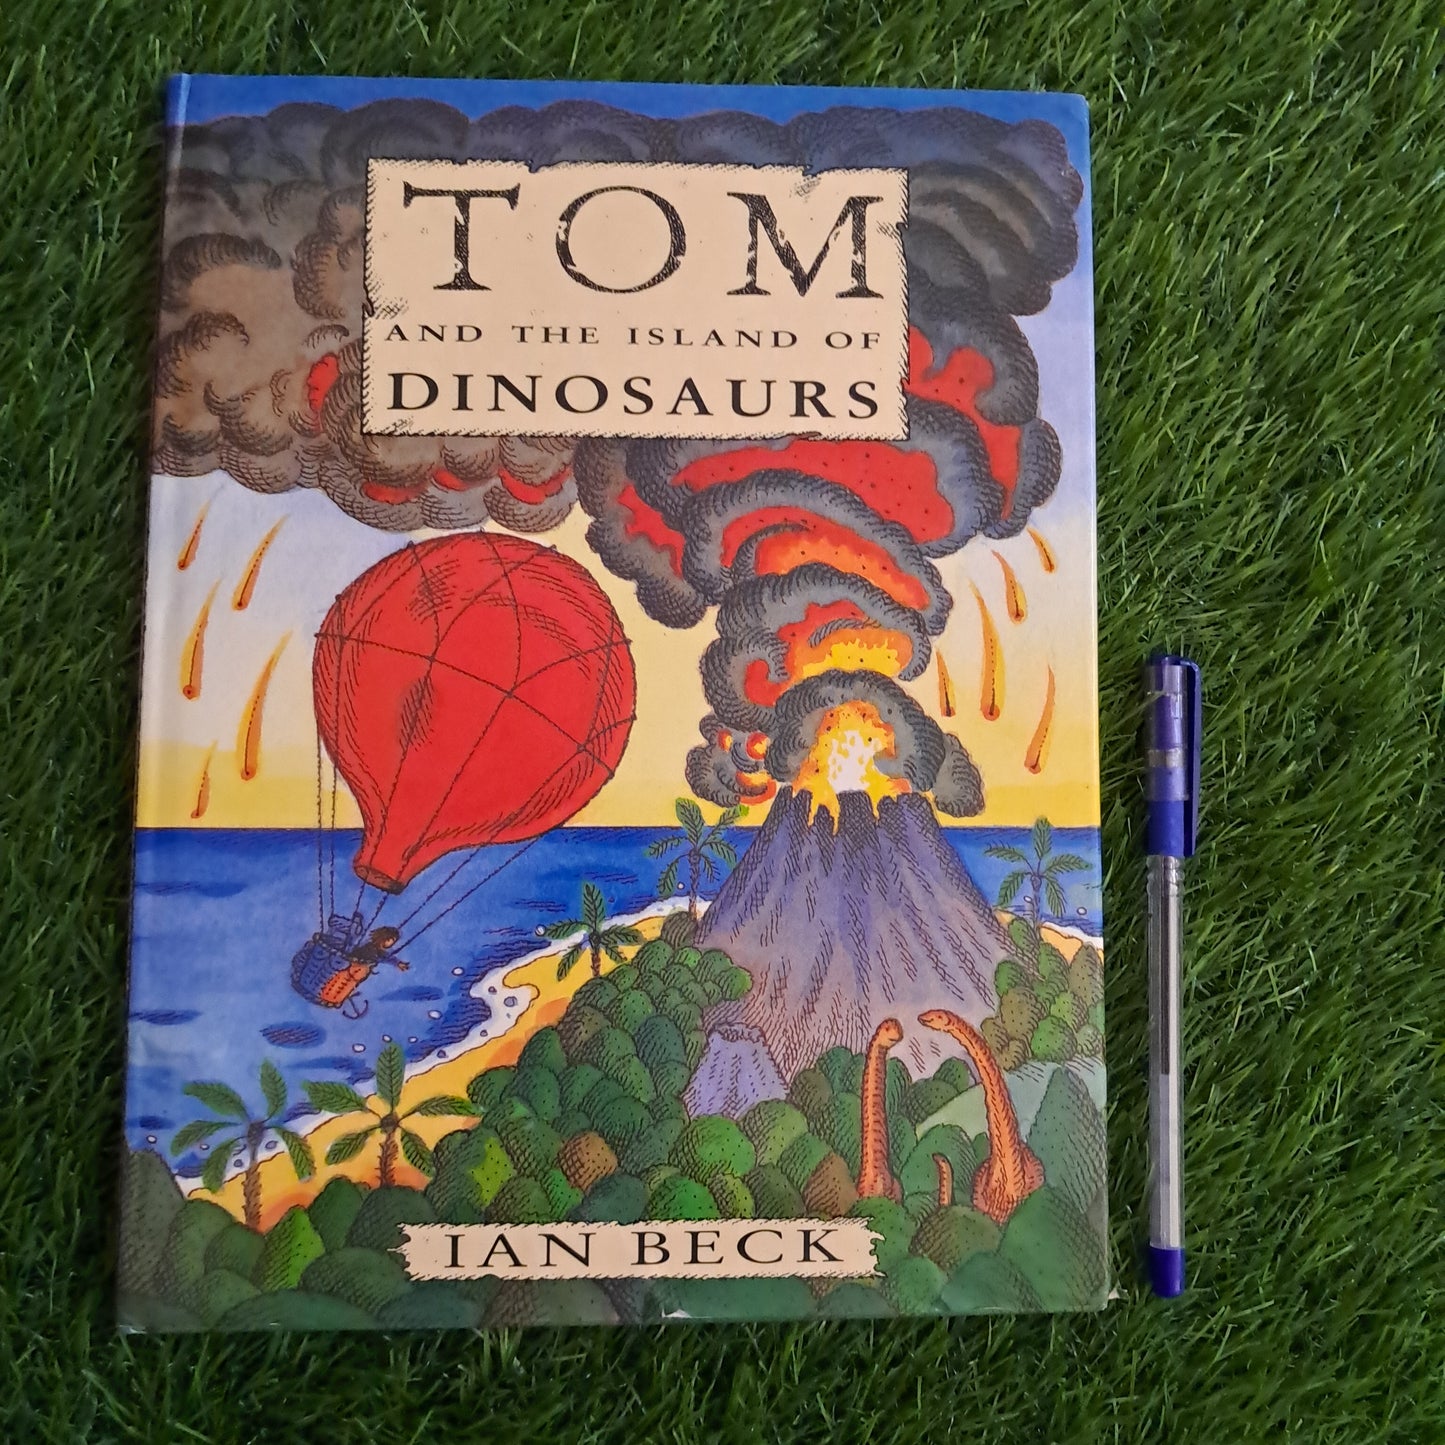 TOM AND THE ISLAND of dinosaurs